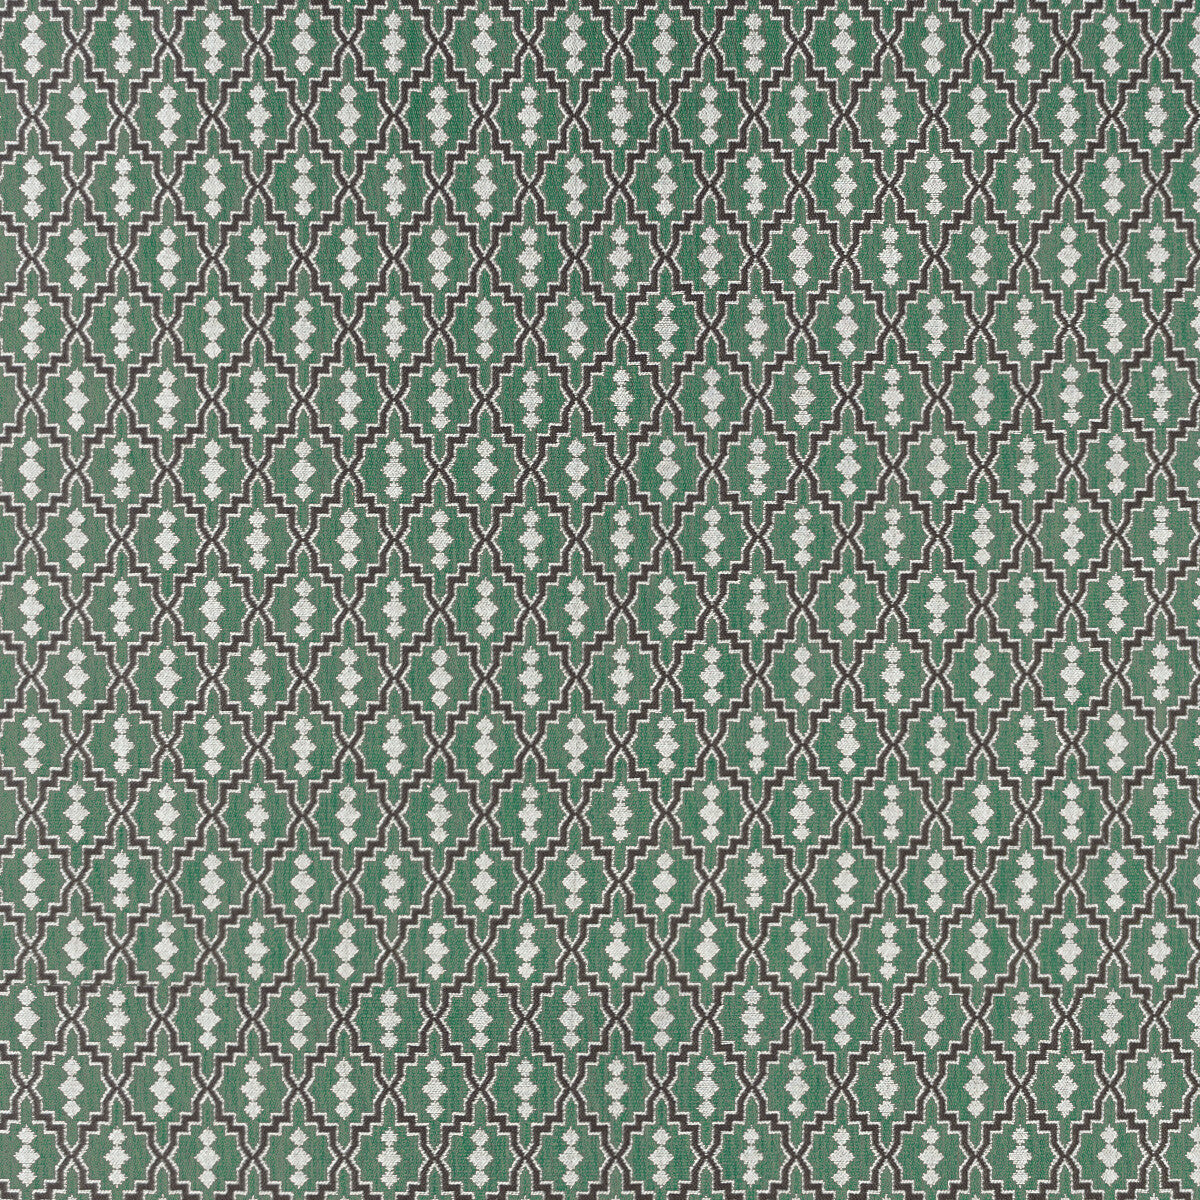 Aztec fabric in verde oscuro color - pattern GDT5152.008.0 - by Gaston y Daniela in the Gaston Rio Grande collection